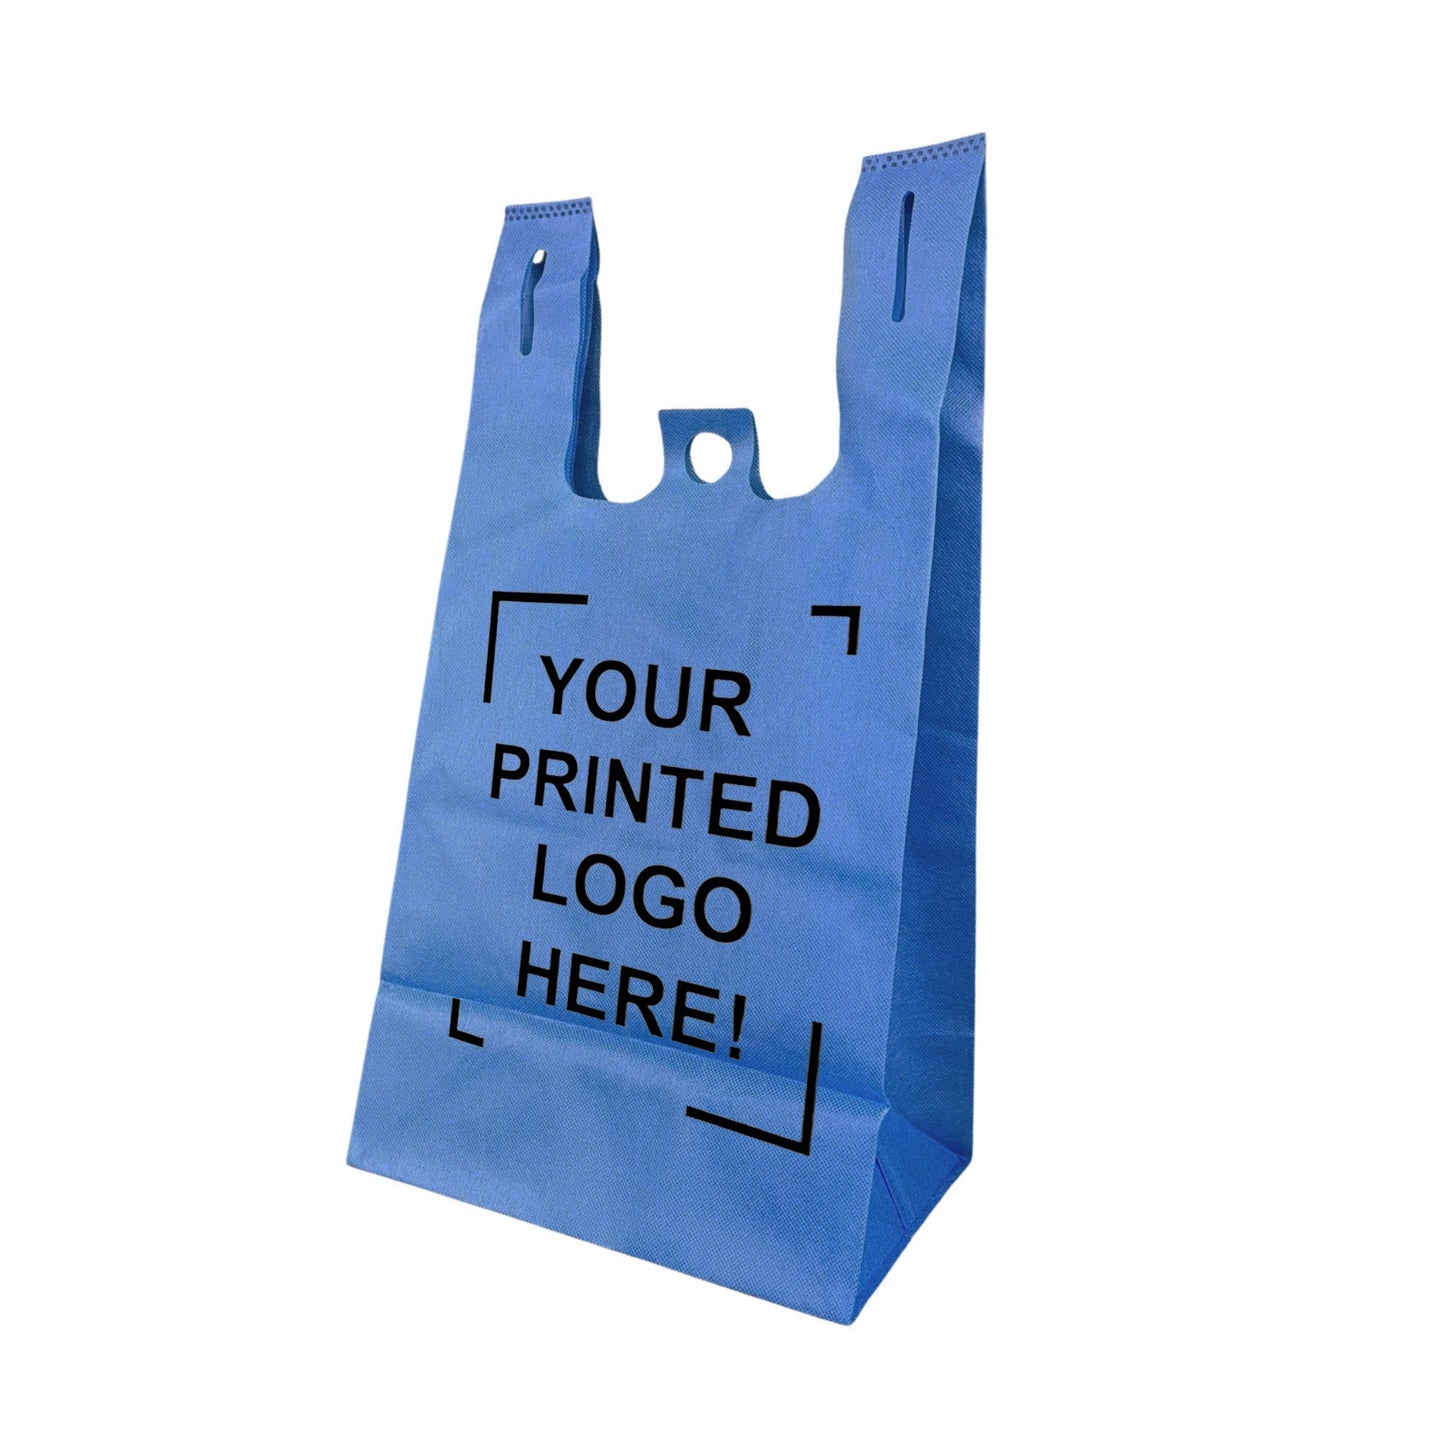 200pcs, Non-Woven Reusable T-Shirt Bag 12x7x22x7 inches Blue Shopping Bags Square Bottom, One Color Custom Print, Printed in Canada